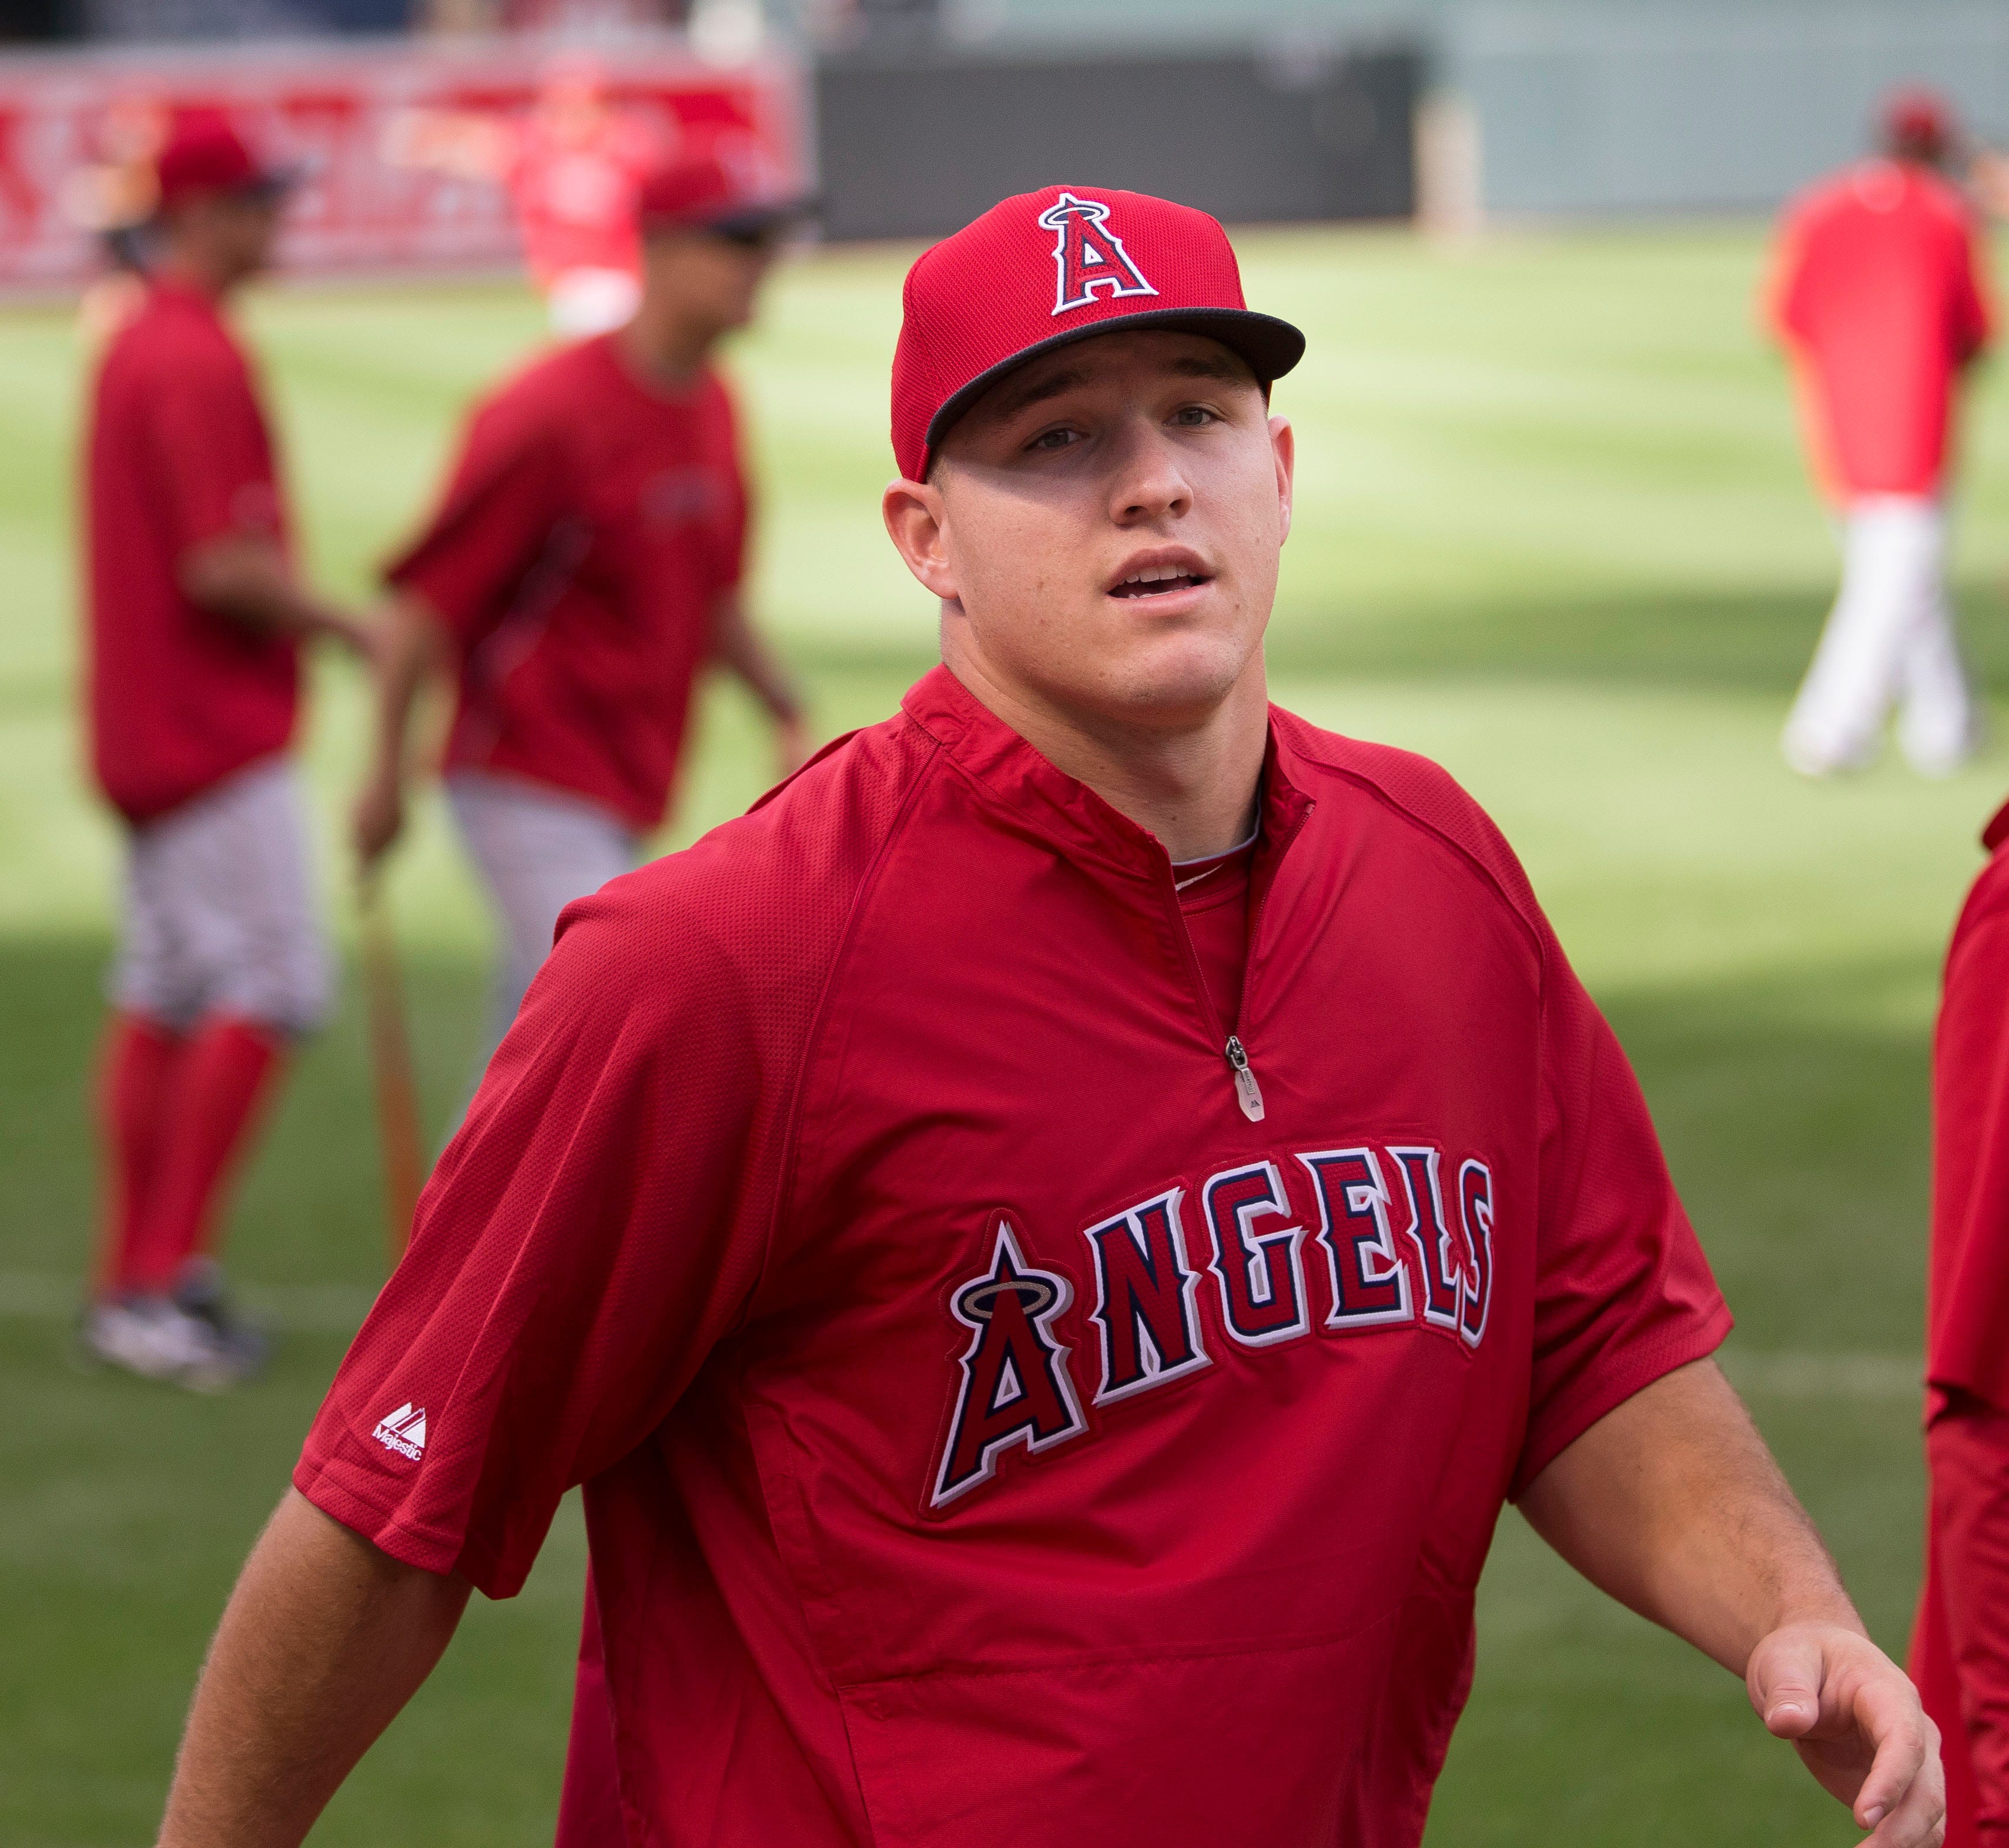 Mike Trout is the MVP because there isn't a definition of 'most